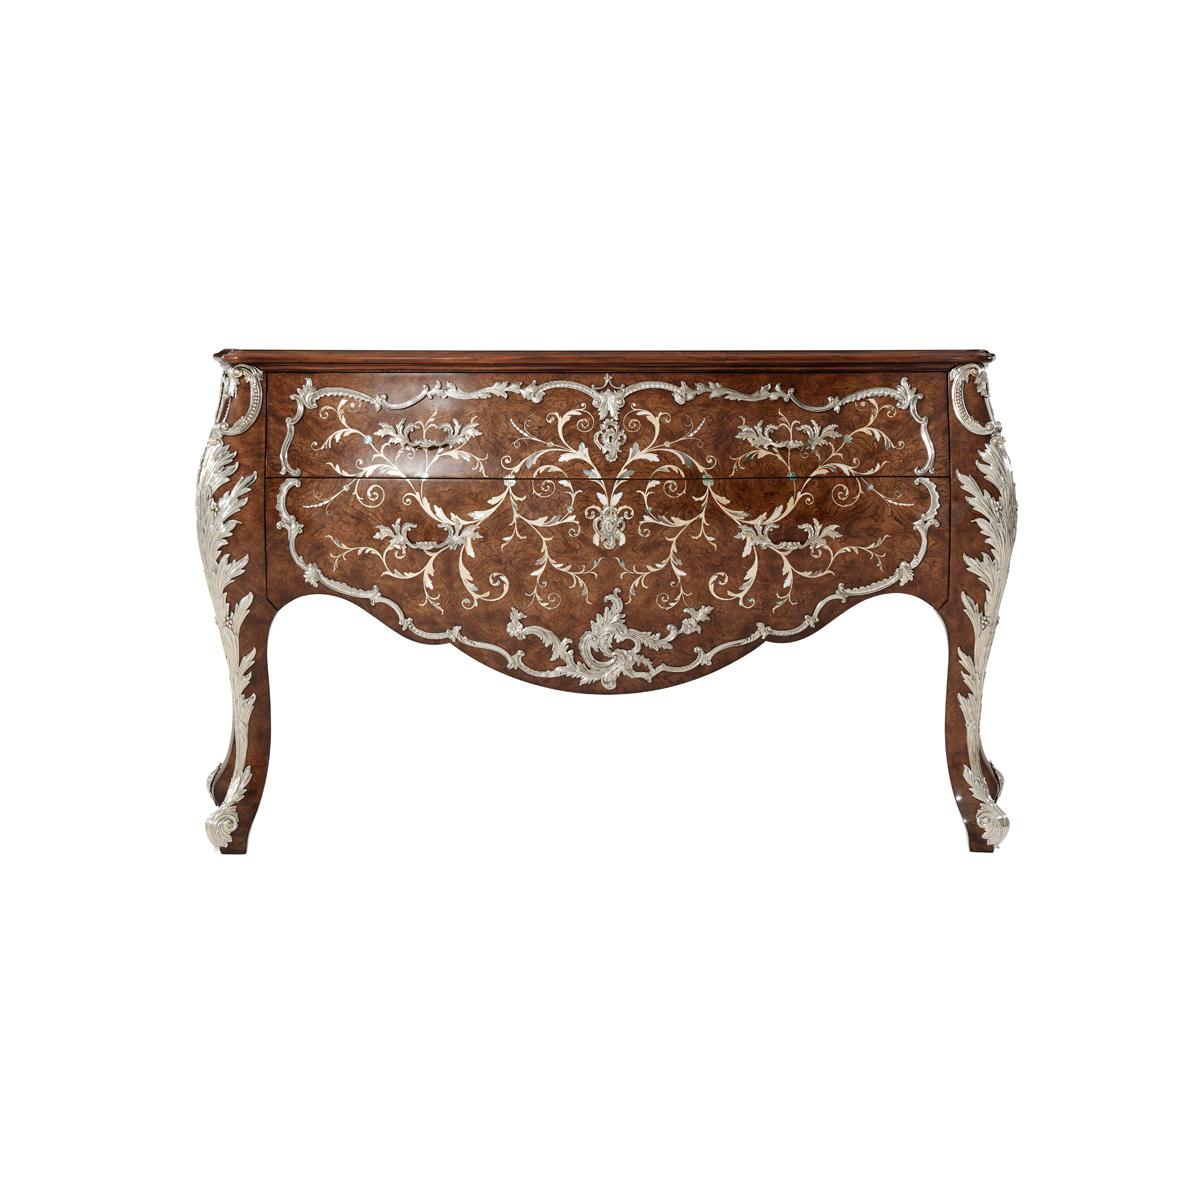 A magnificent mahogany and marquetry bombé Commode, veneered in Chestnut burl throughout and with fine sycamore scrolling vine marquetry inlaid leaves and flowers; overlaid with finely cast rubbed nickel-brass and mounts and handles, on bold